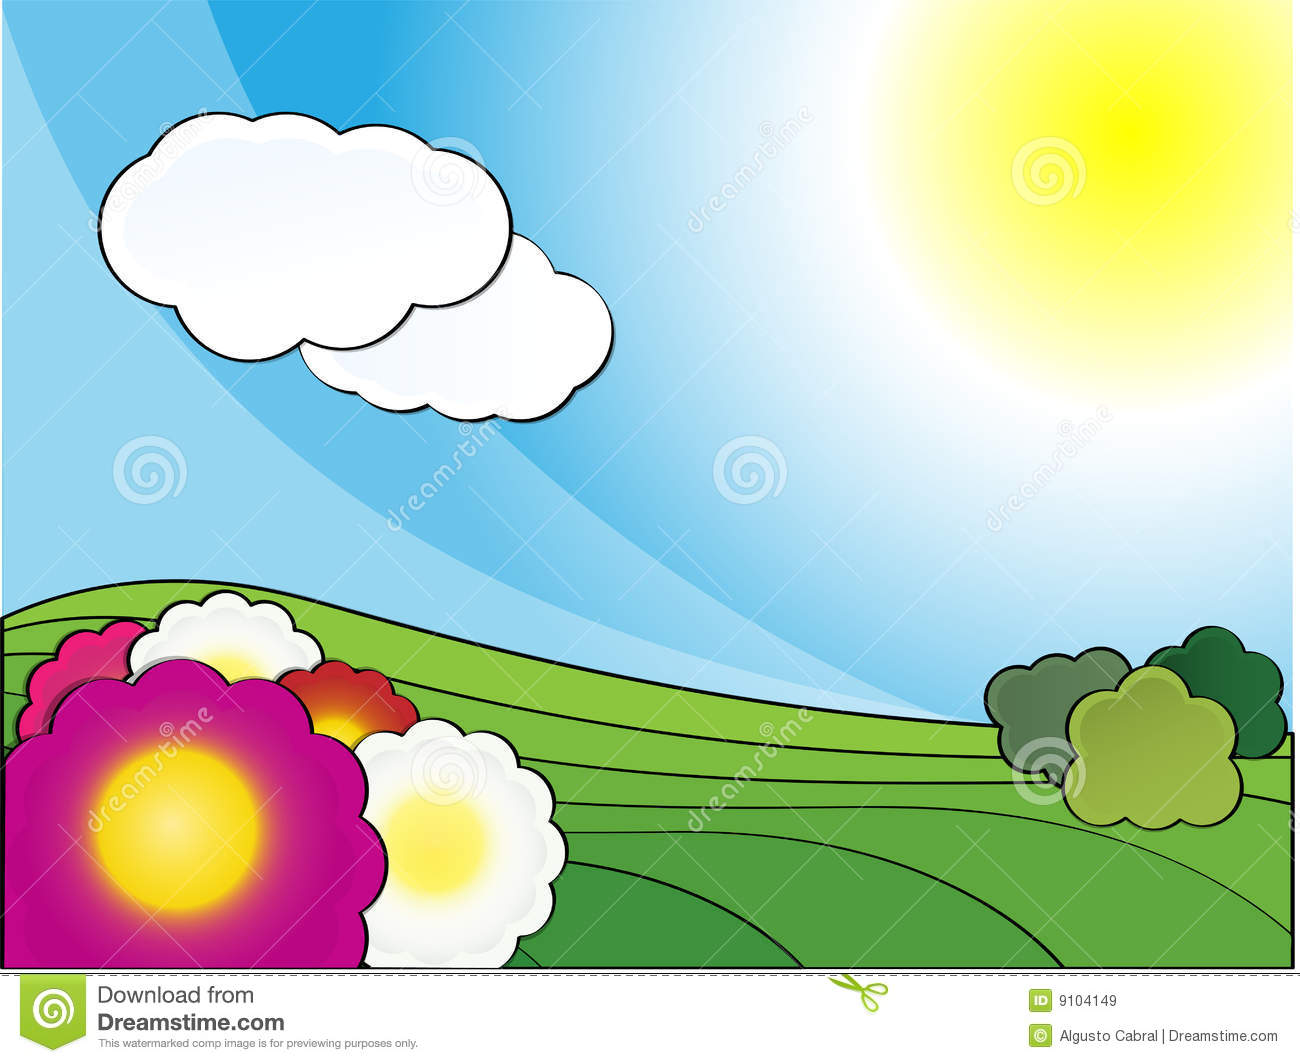 Spring Landscape Day Royalty Free Stock Images   Image  9104149